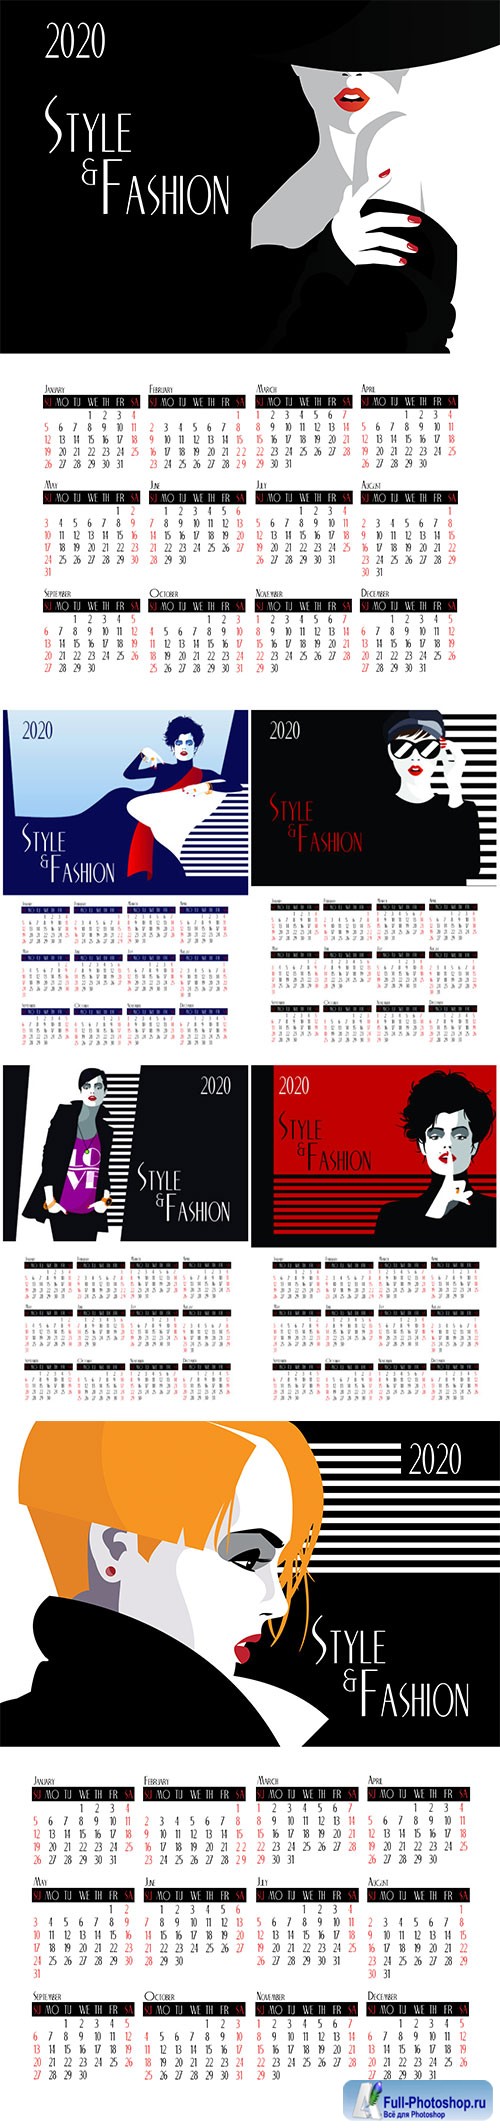 Calendar 2020 with fashion woman in style Pop art